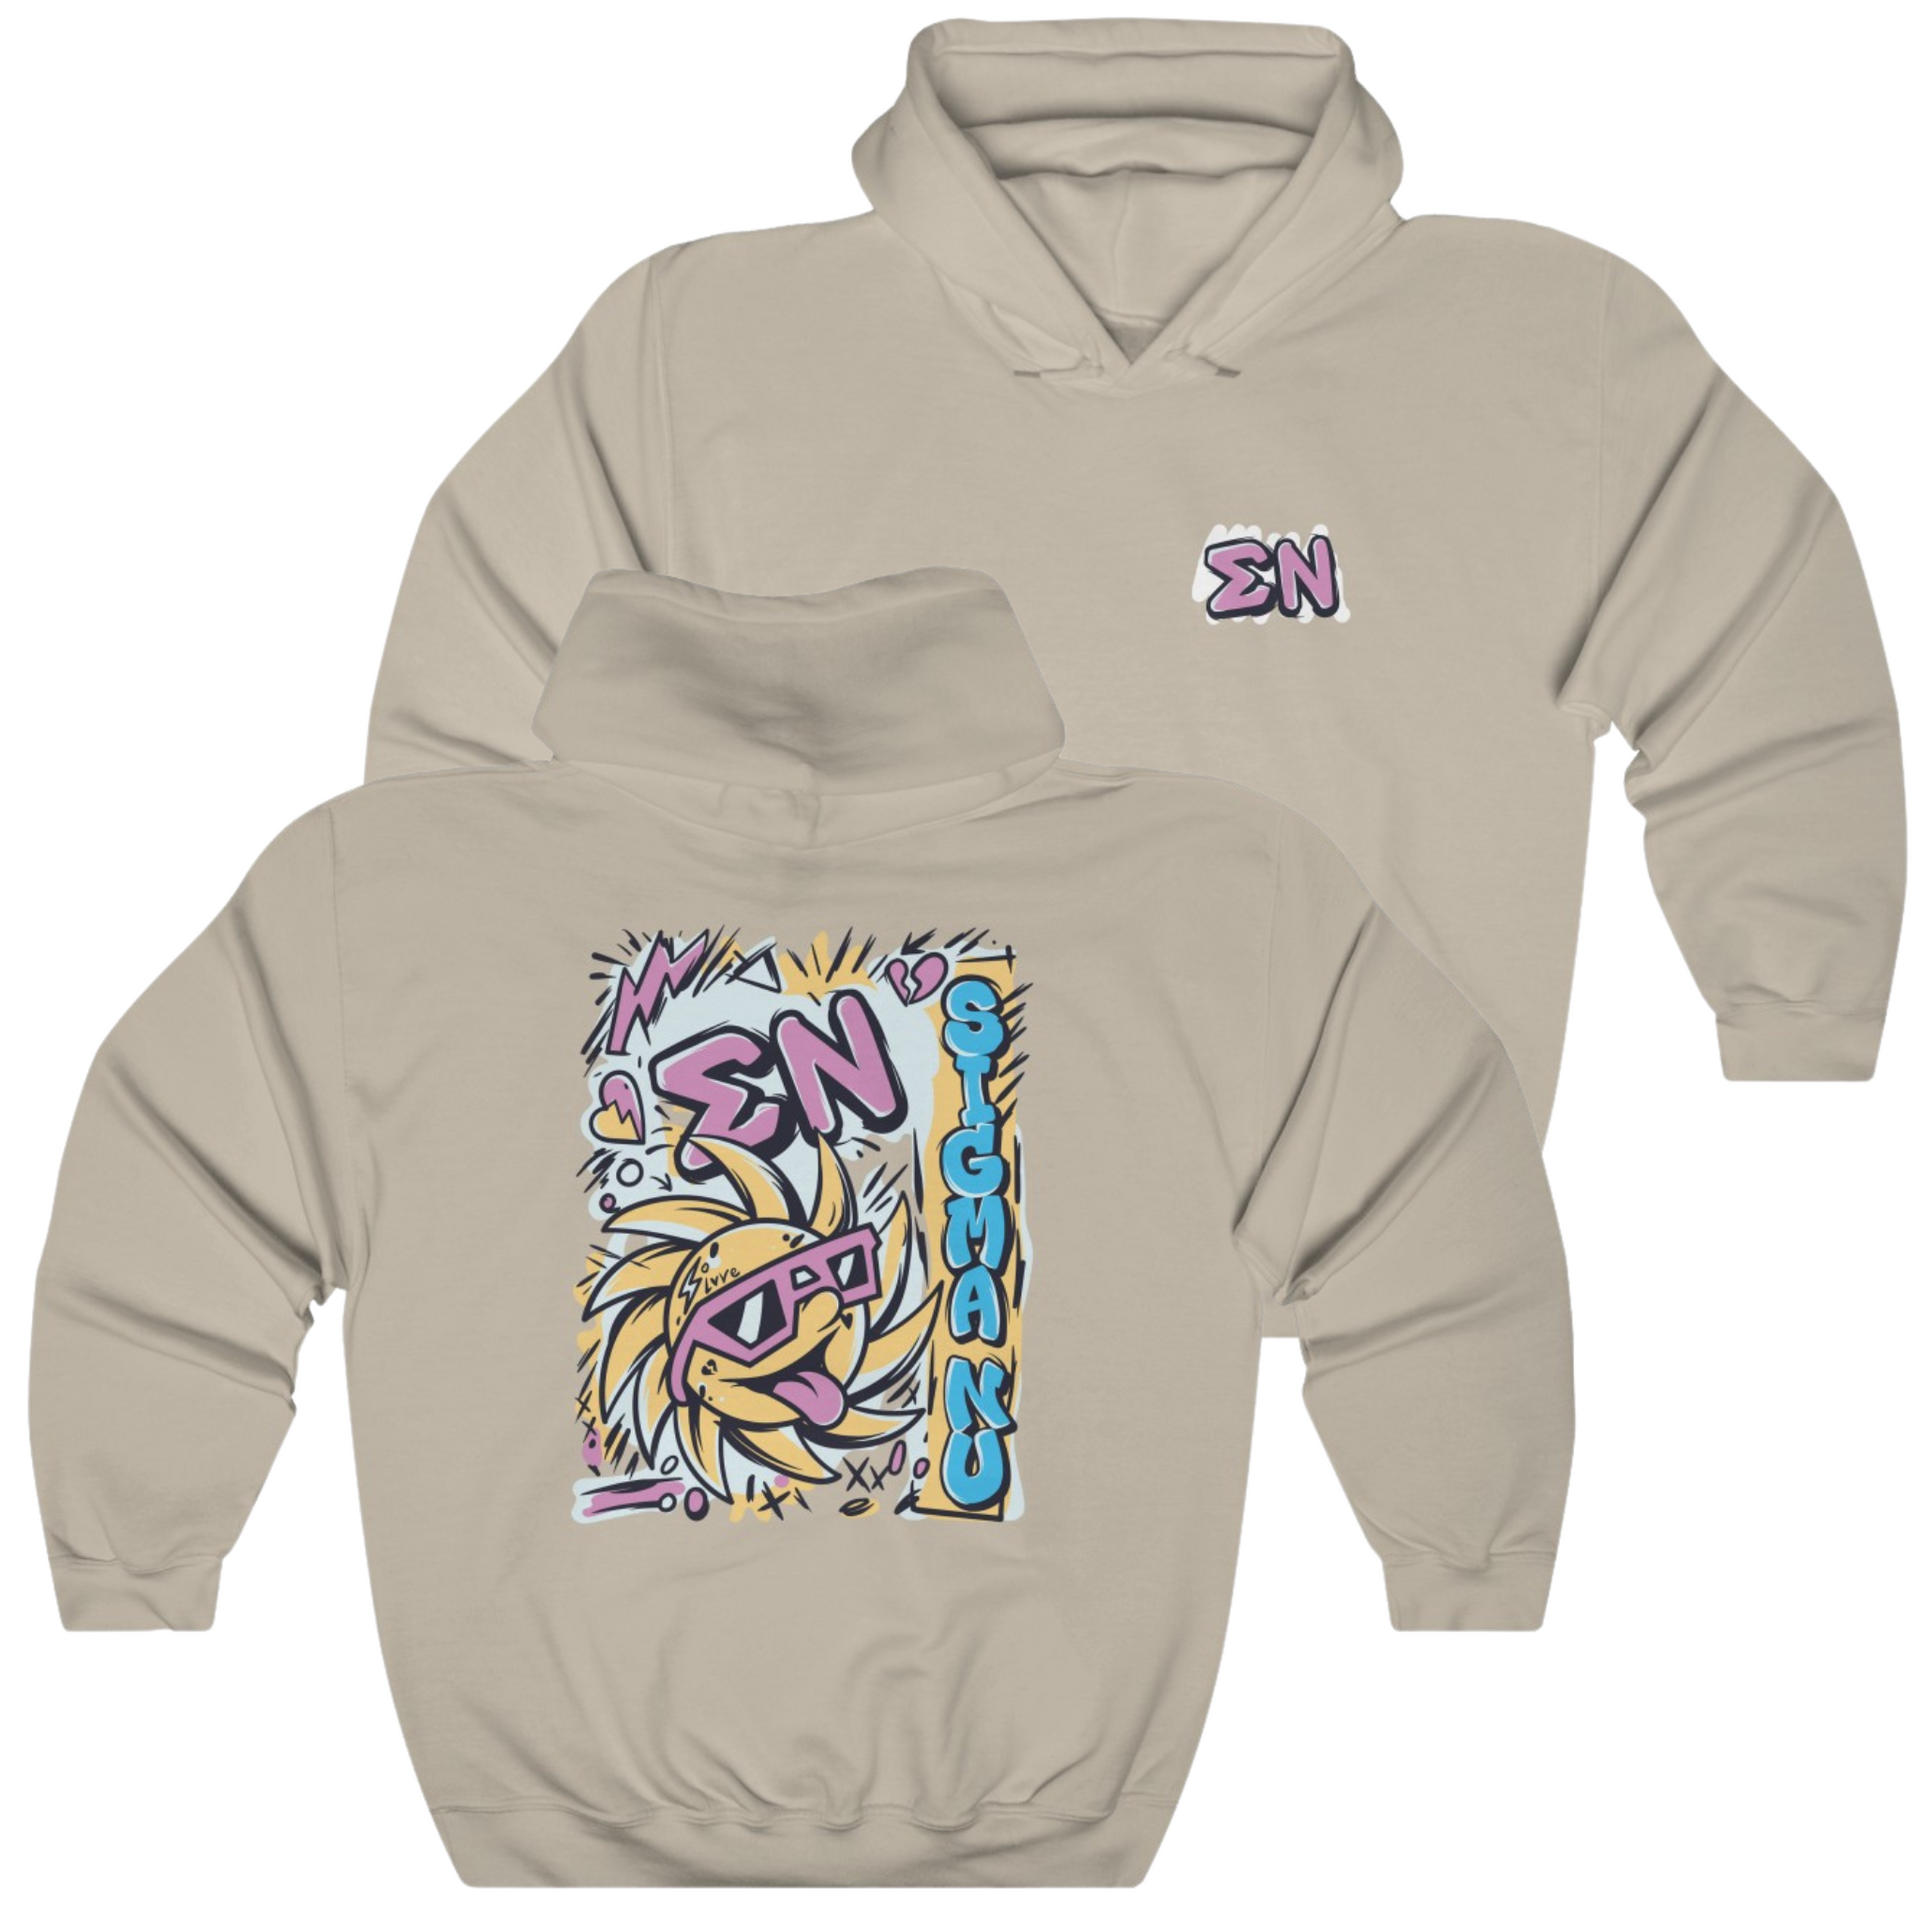 Sand Sigma Nu Graphic Hoodie | Fun in the Sun | Sigma Nu Clothing, Apparel and Merchandise